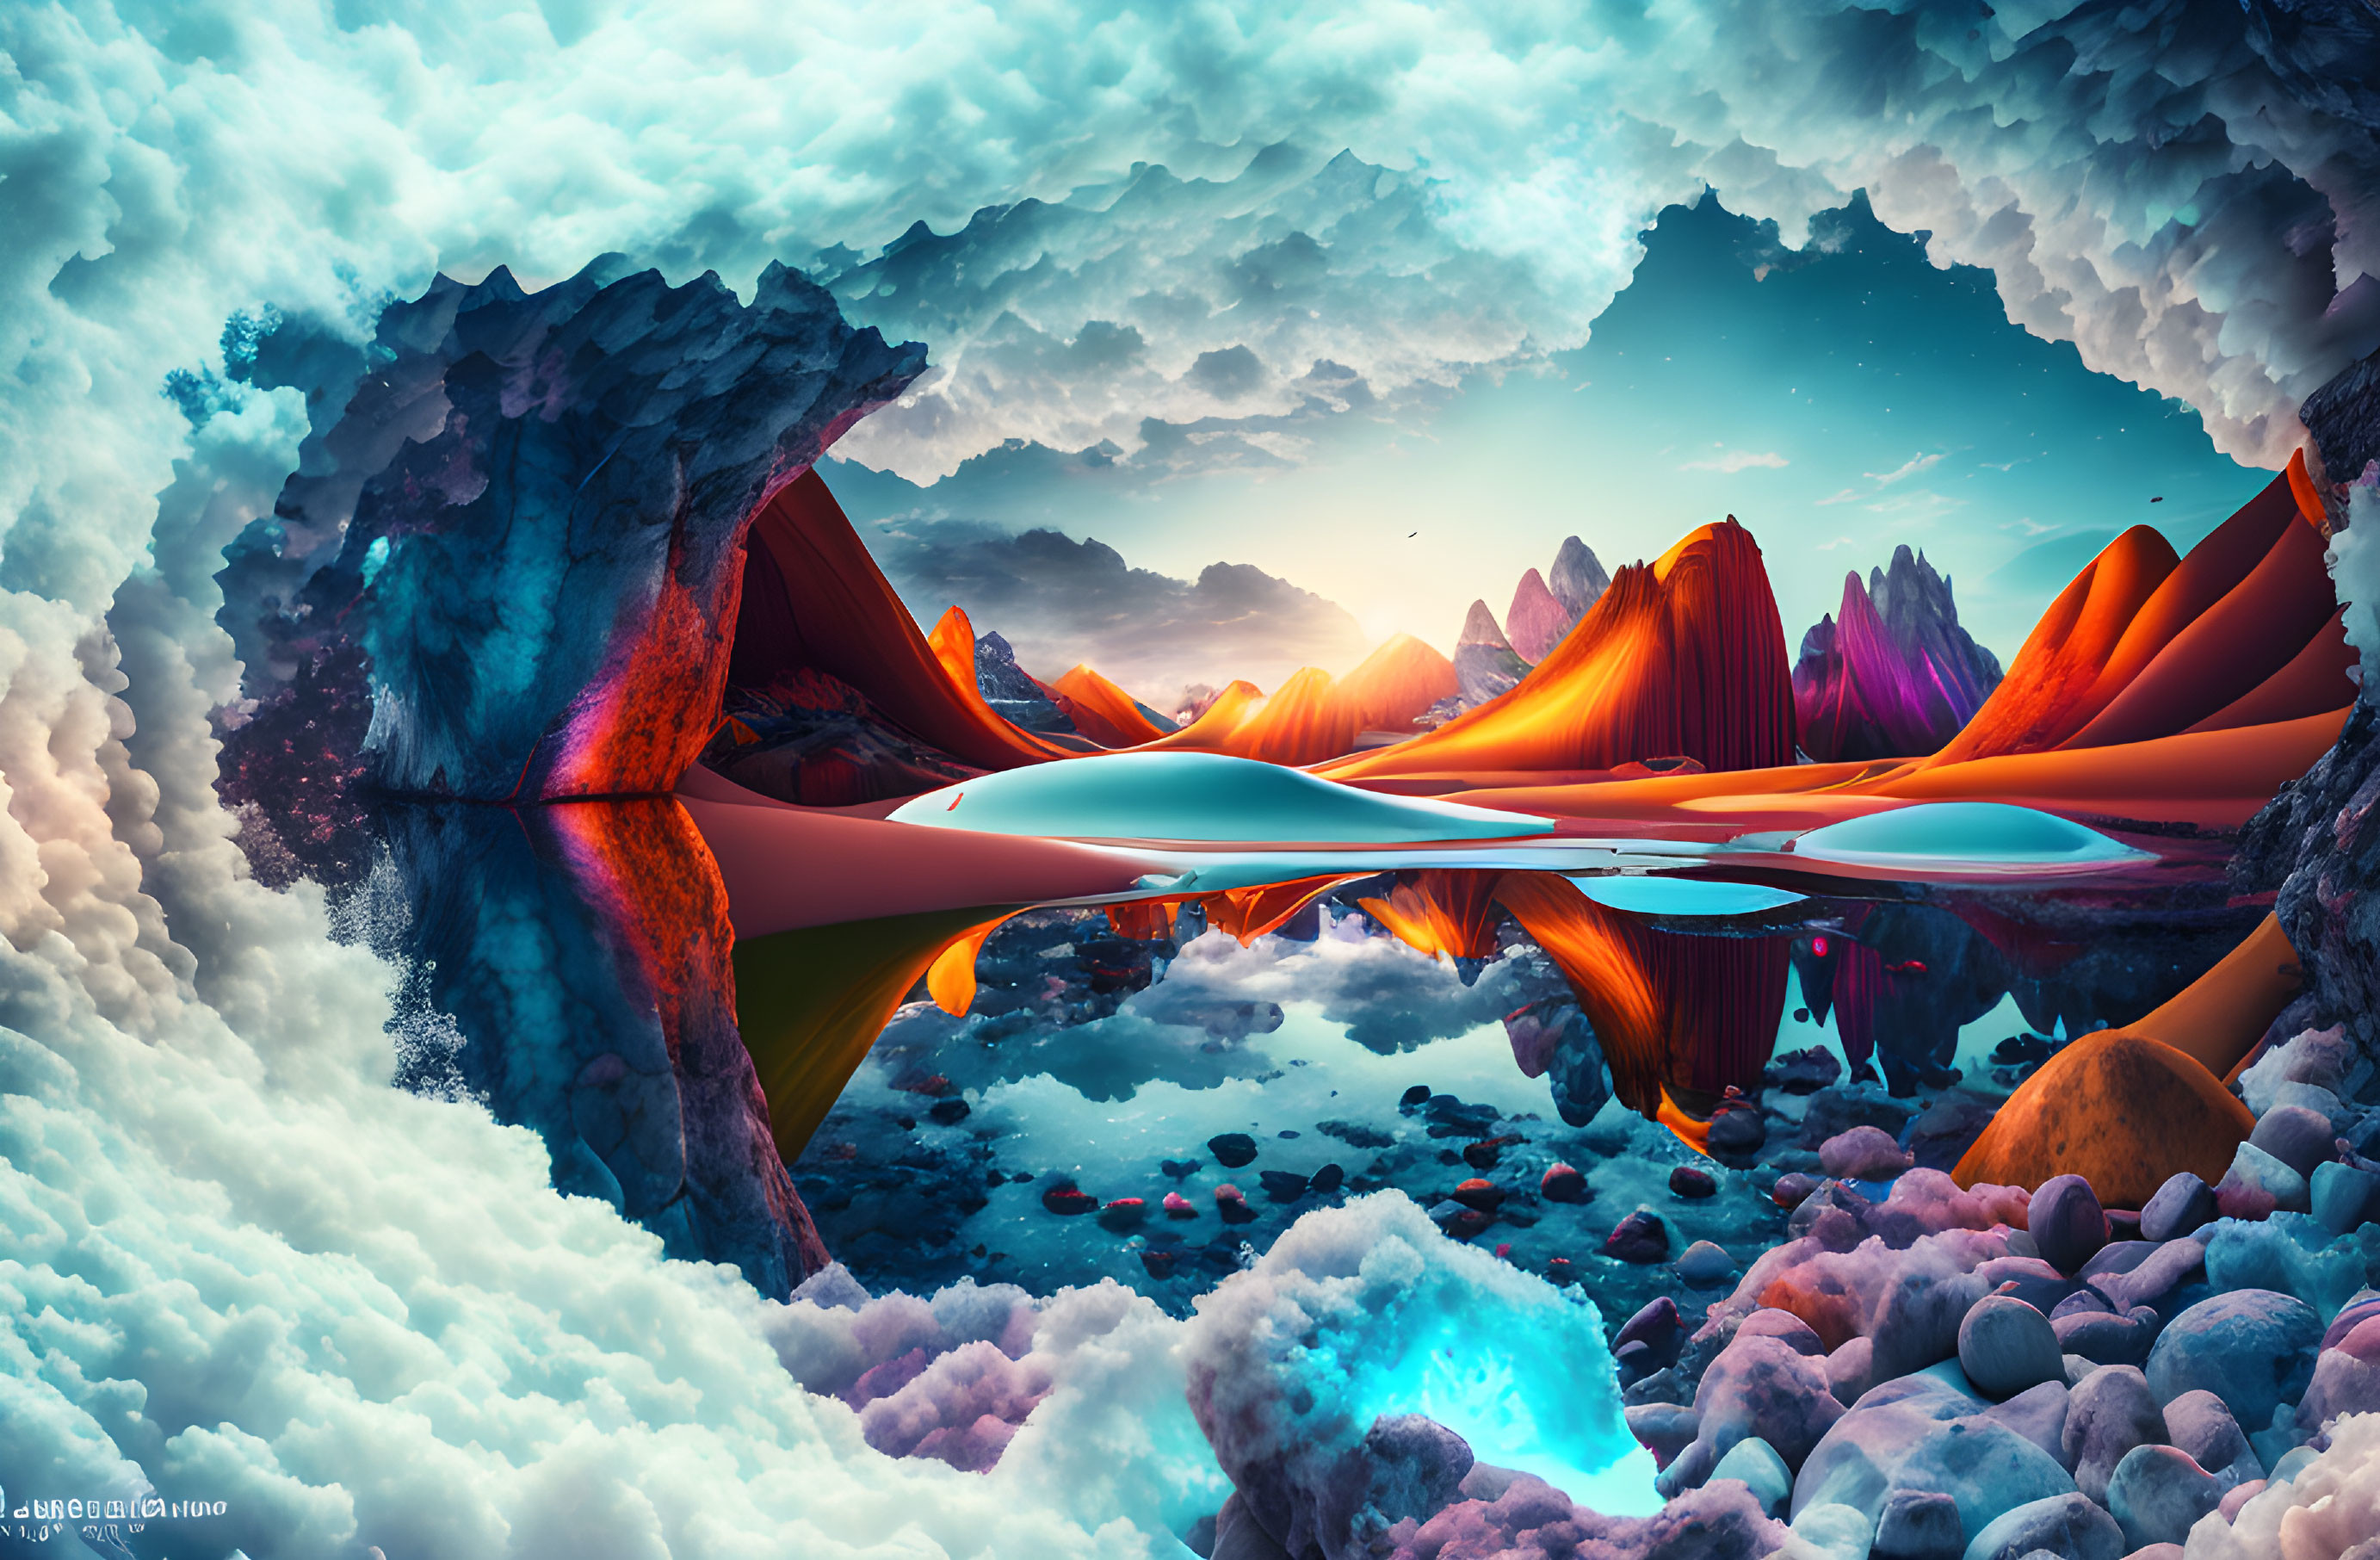 Surreal landscape with orange peaks and reflective waters